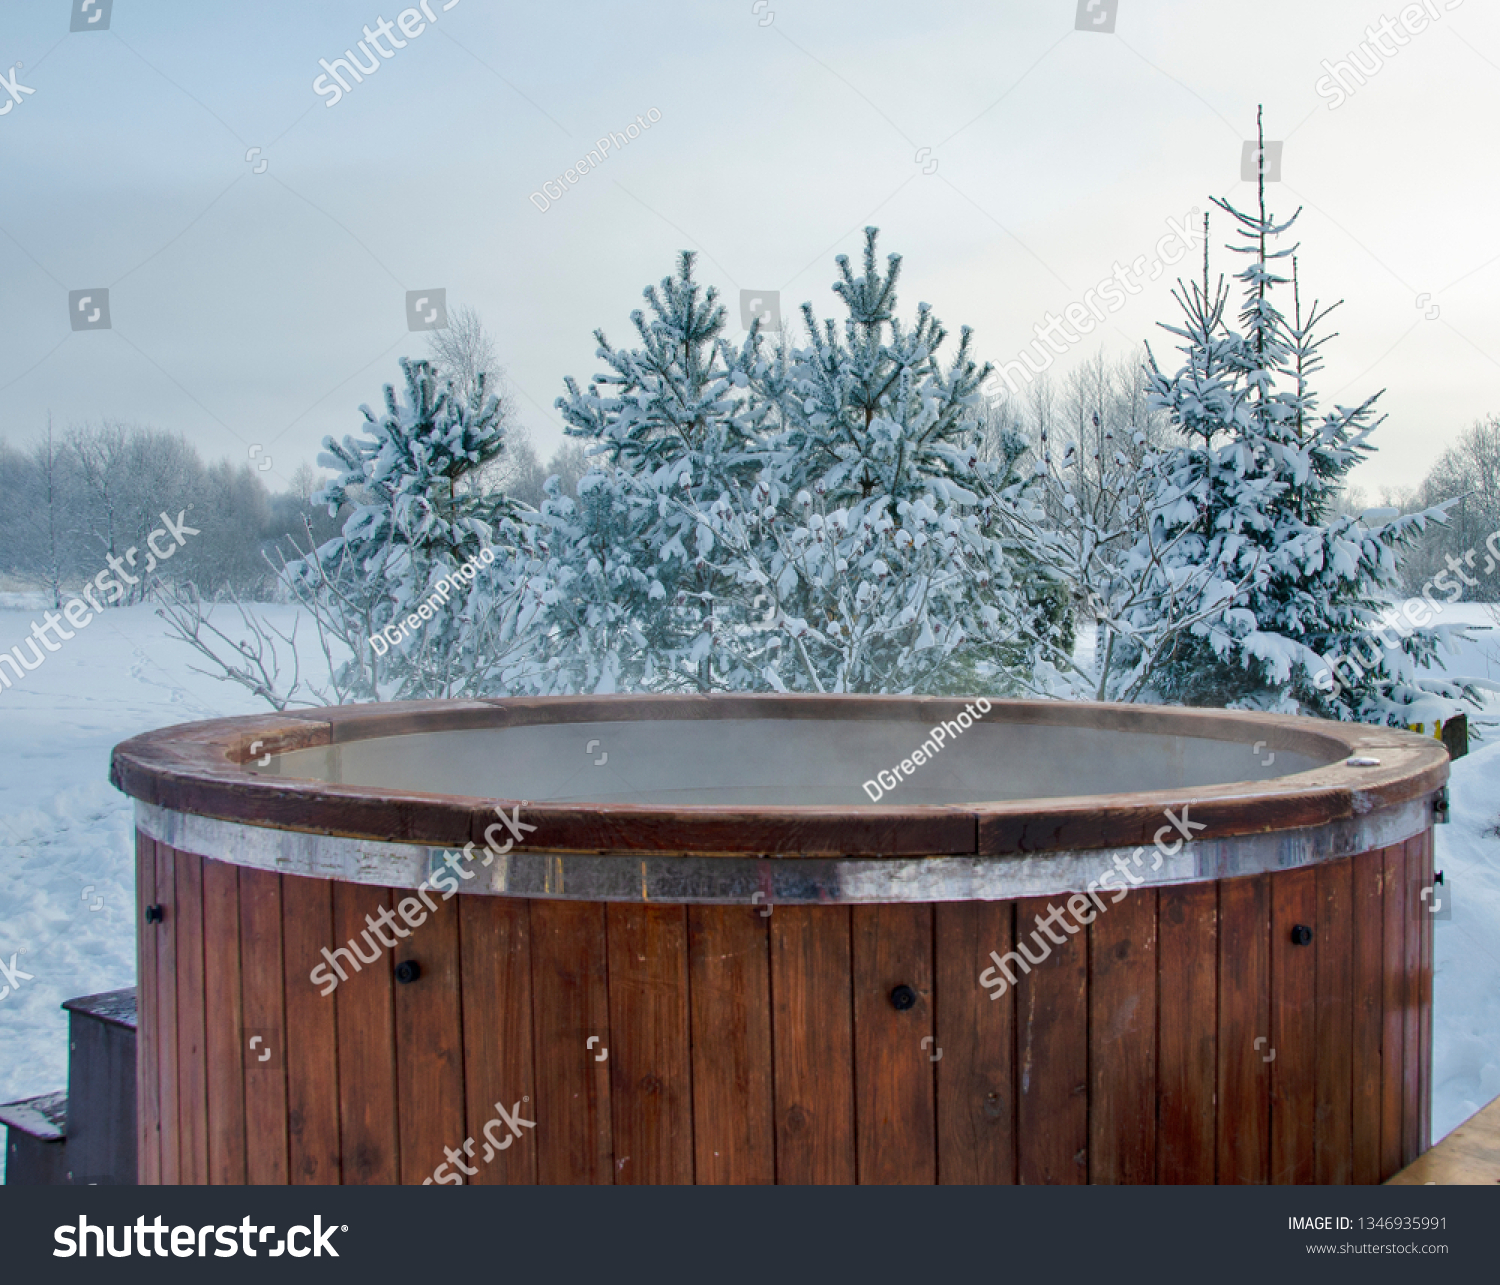 Steaming wooden hot tub with spa in winder with  snow and frosty Christmas trees in background - Image #1346935991